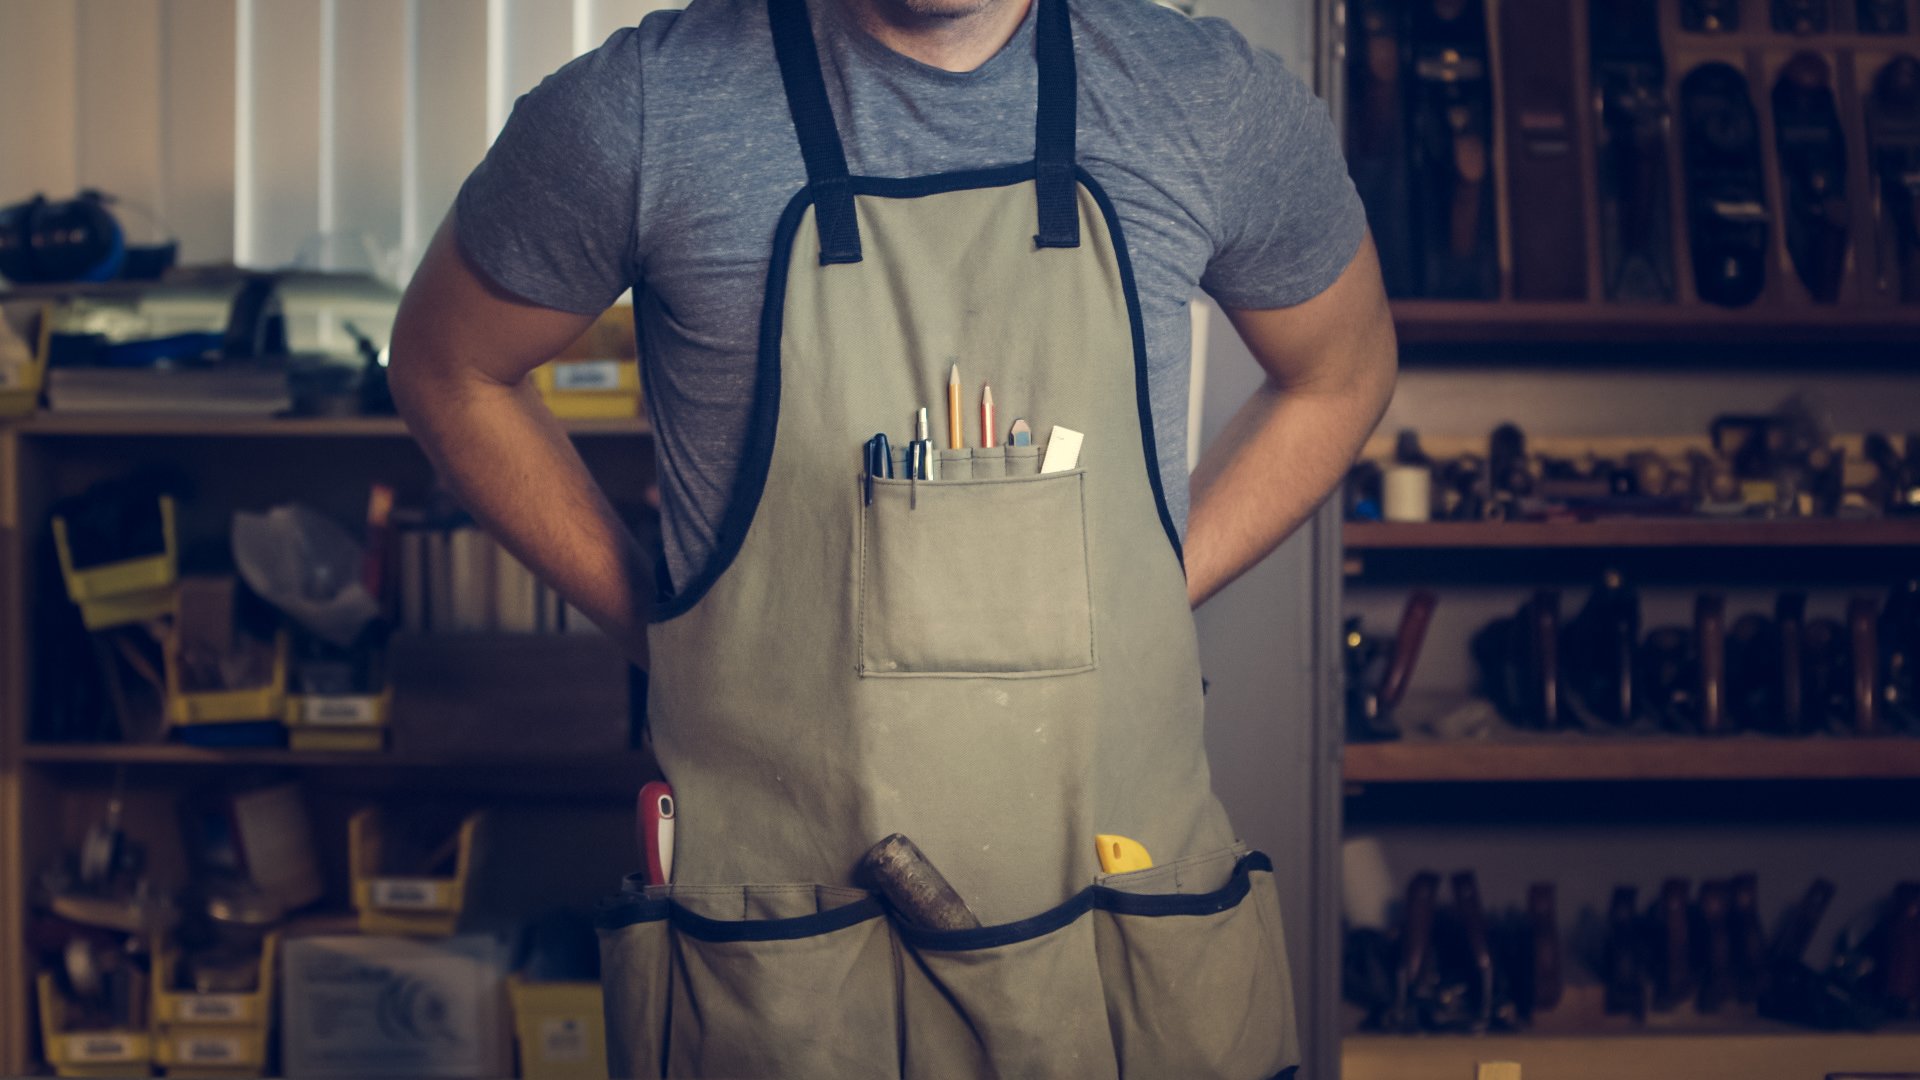 A man wearing a work apron with tools in it.